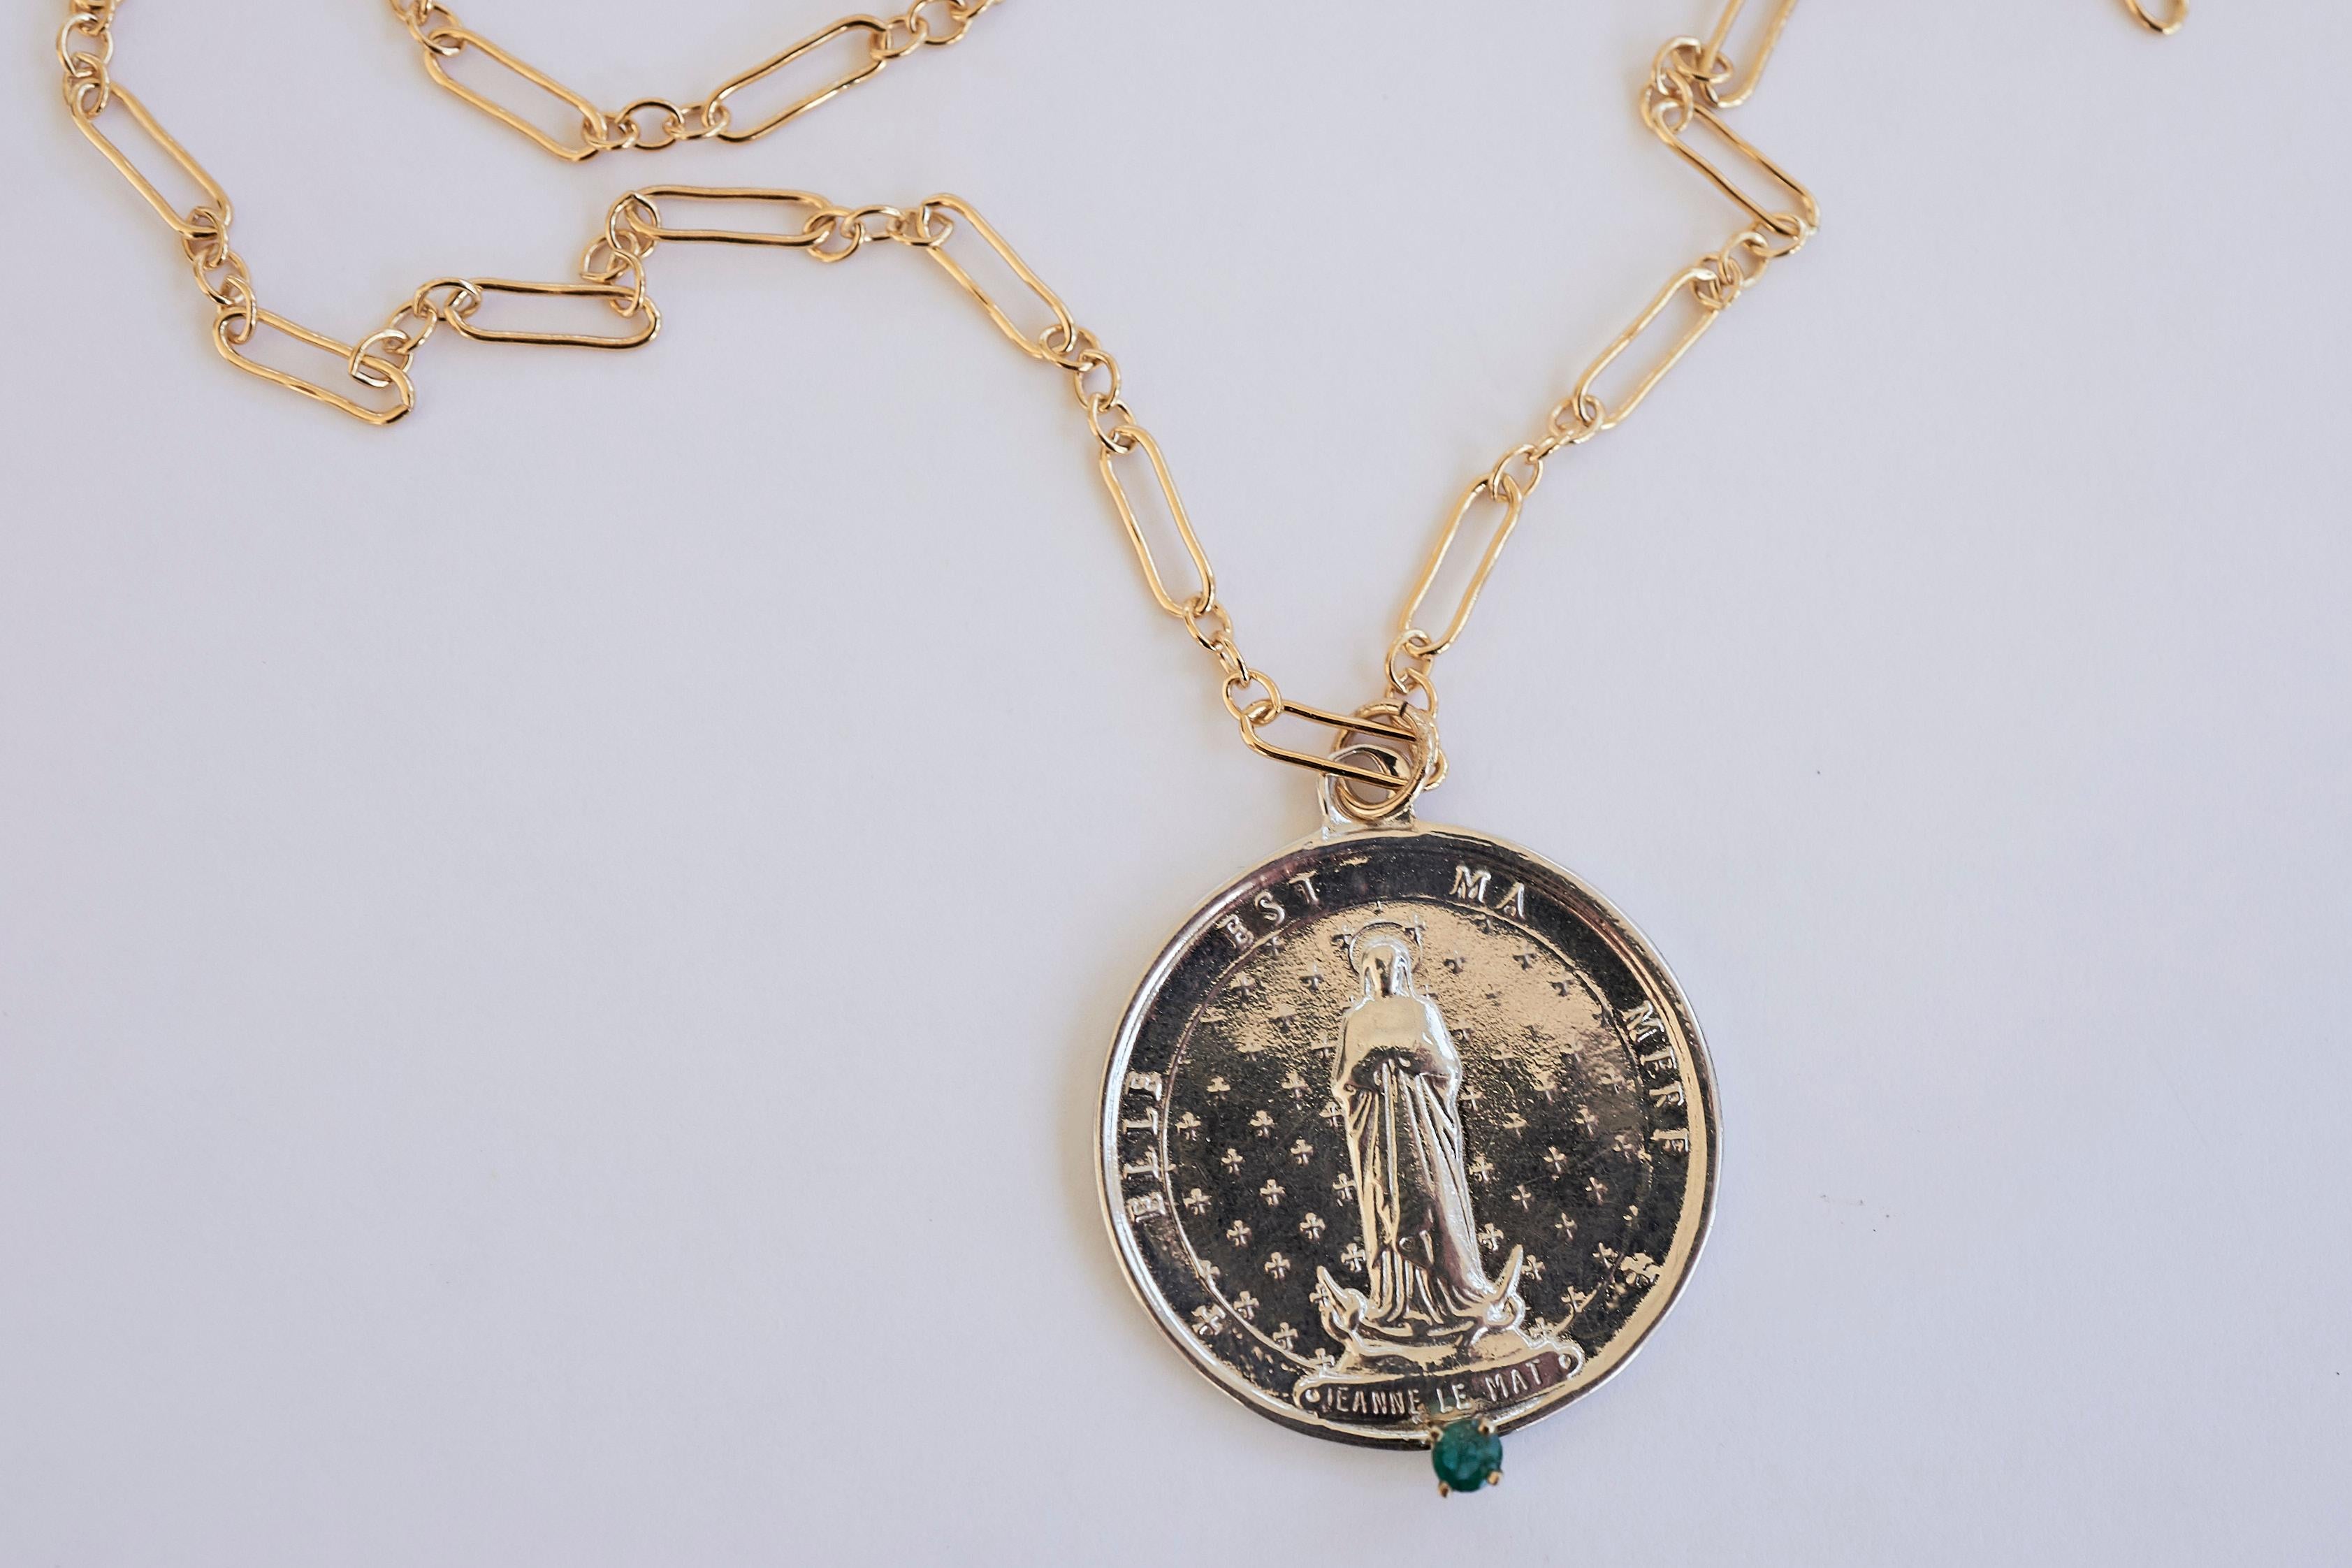 Women's or Men's Emerald Medal Chain Necklace Silver Jeanne Le Mat J Dauphin For Sale